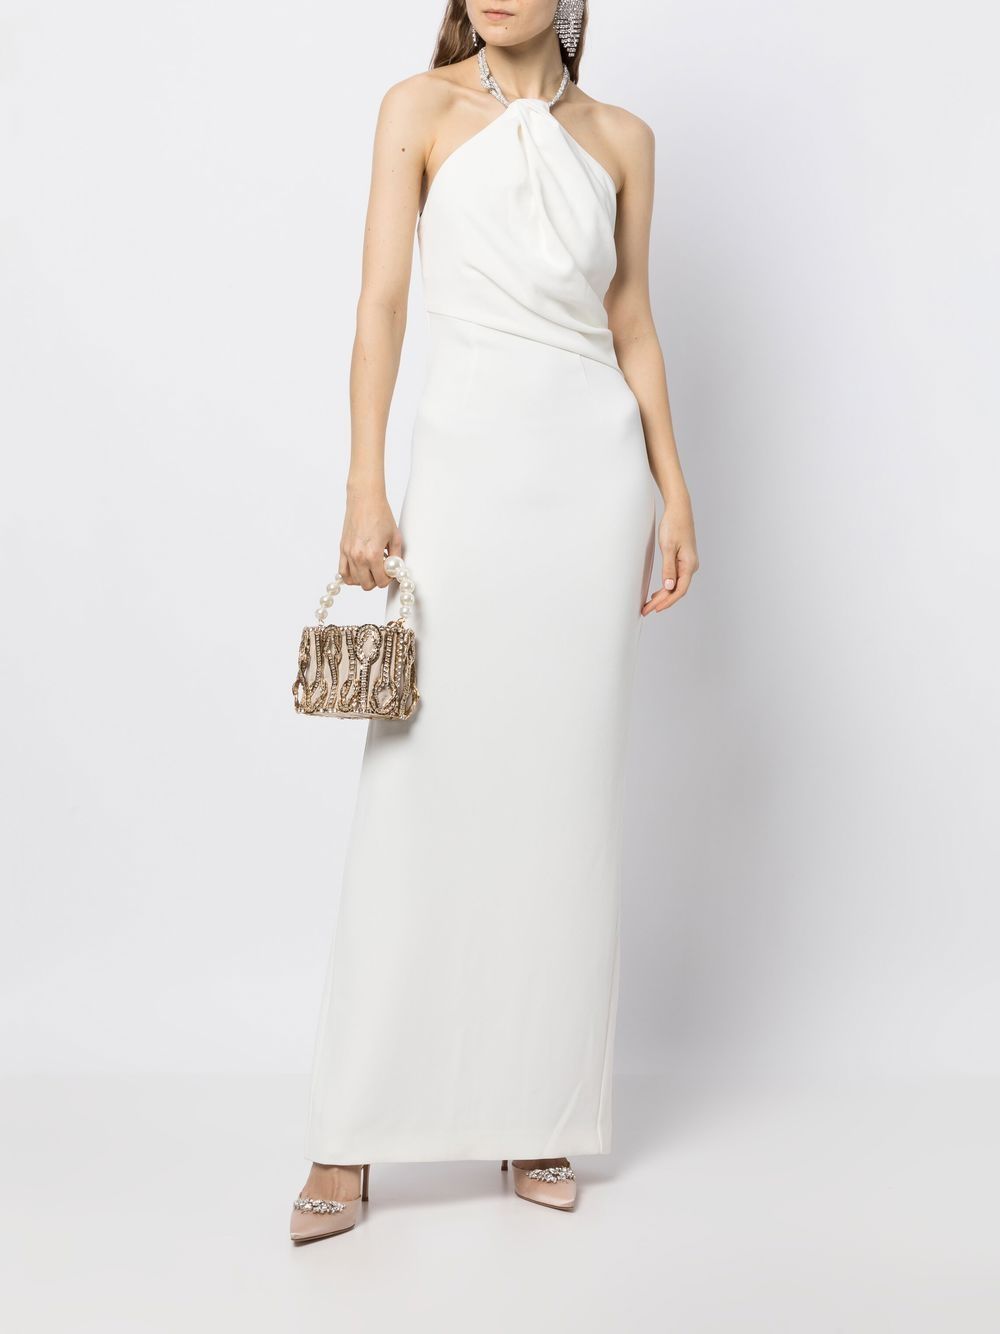 Solace London Riva crystal-embellished Gown - Farfetch